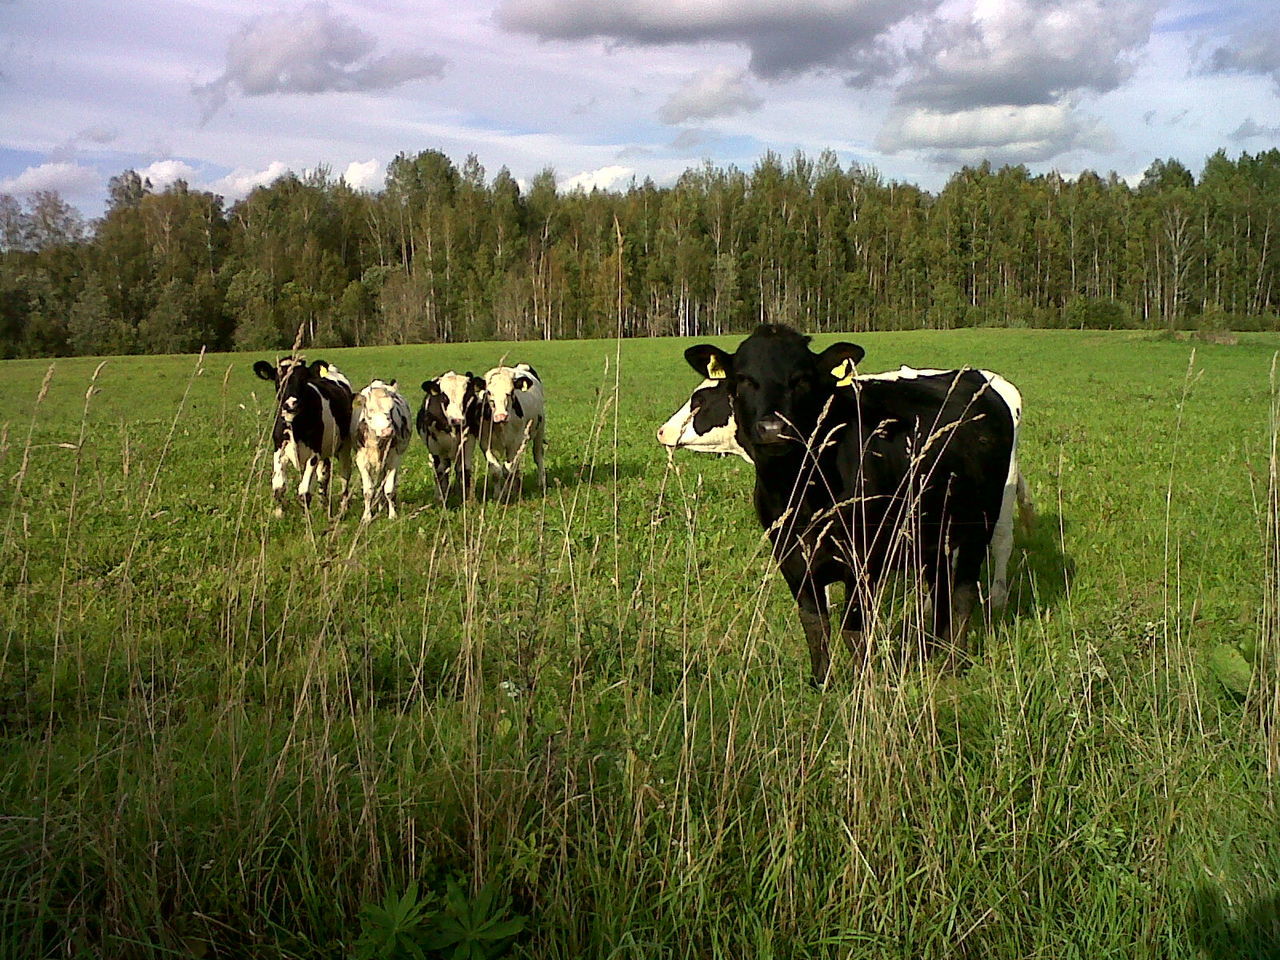 COWS ON FIELD AGAINST TREES